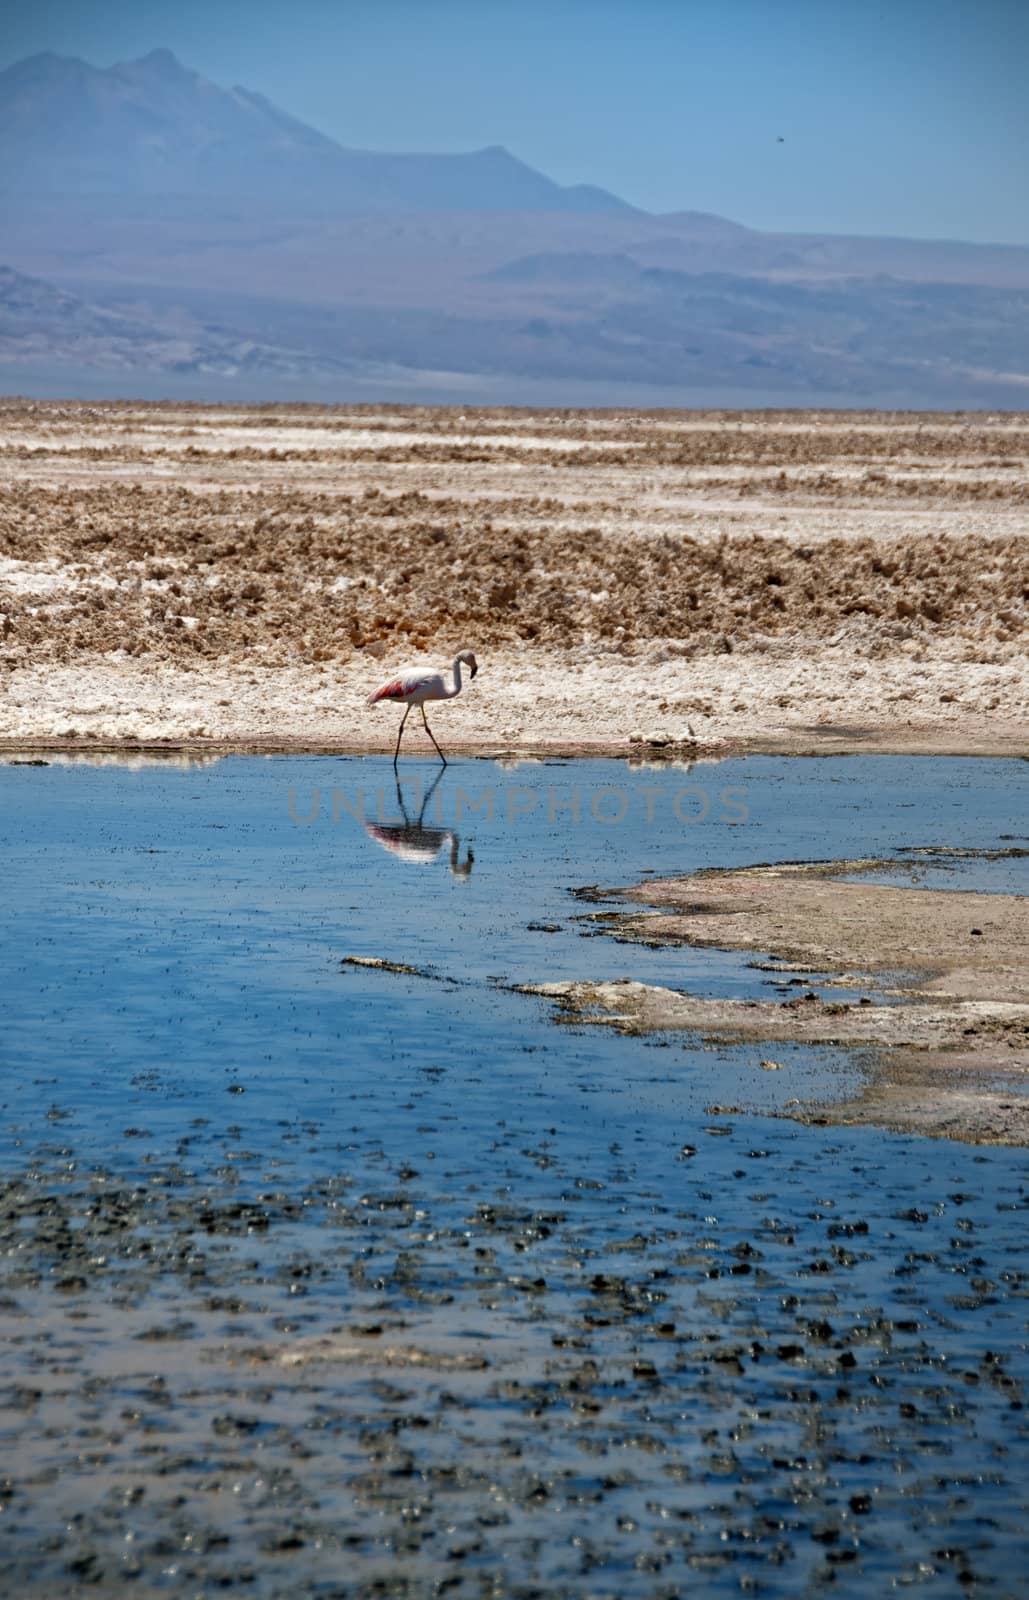 Flamingo with his reflection in a lake in the Salt Flats of the Atacama Desert